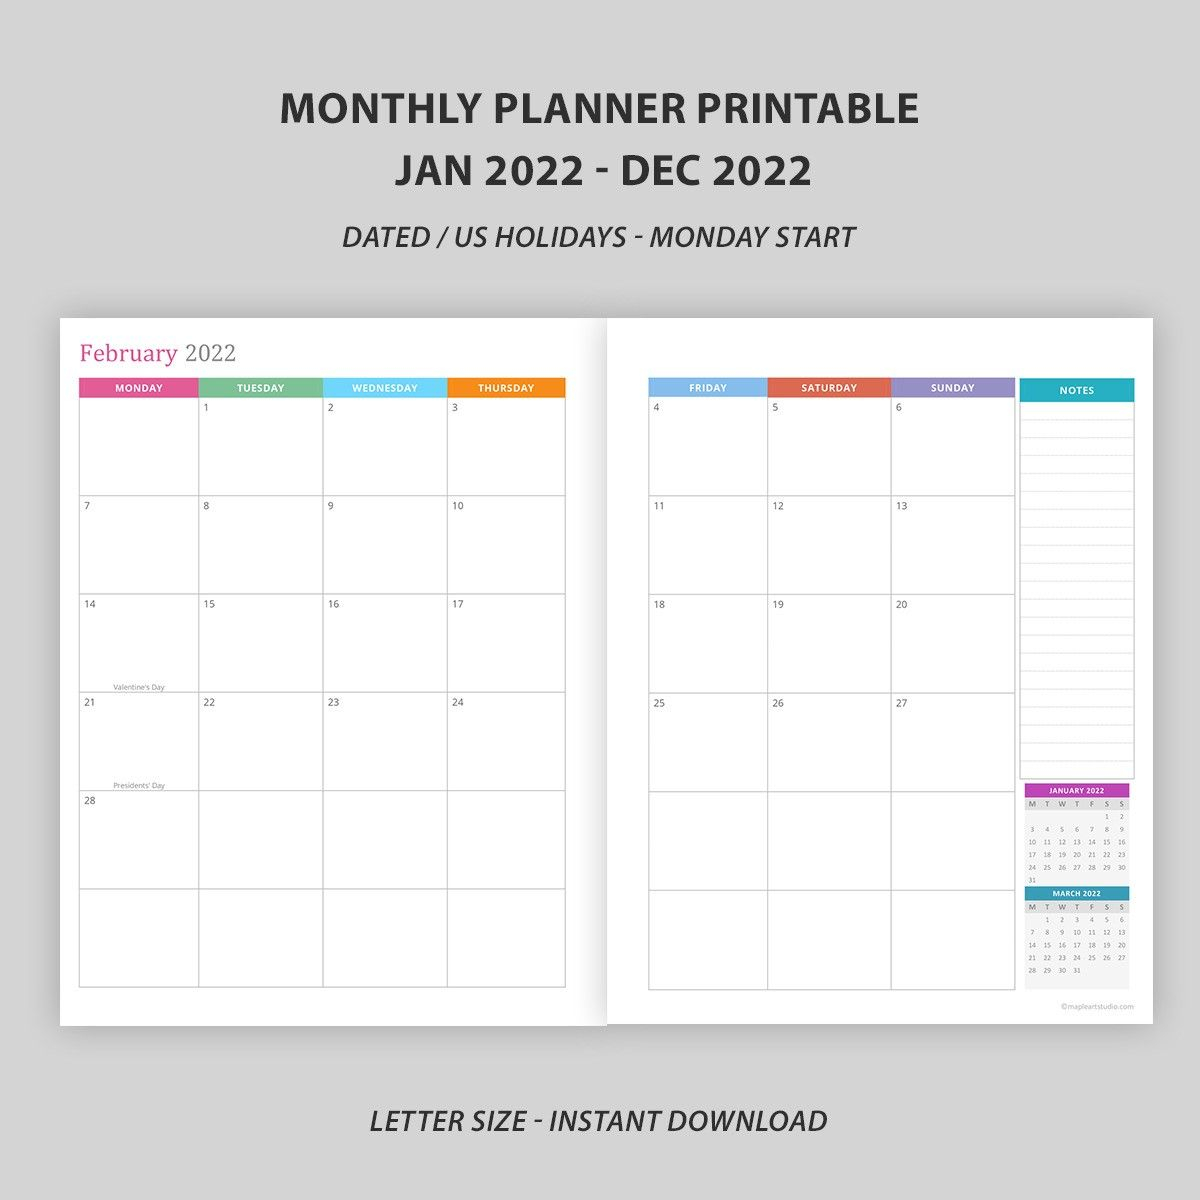 Monthly Planner 2022 Printable | Monthly Calendar 2022